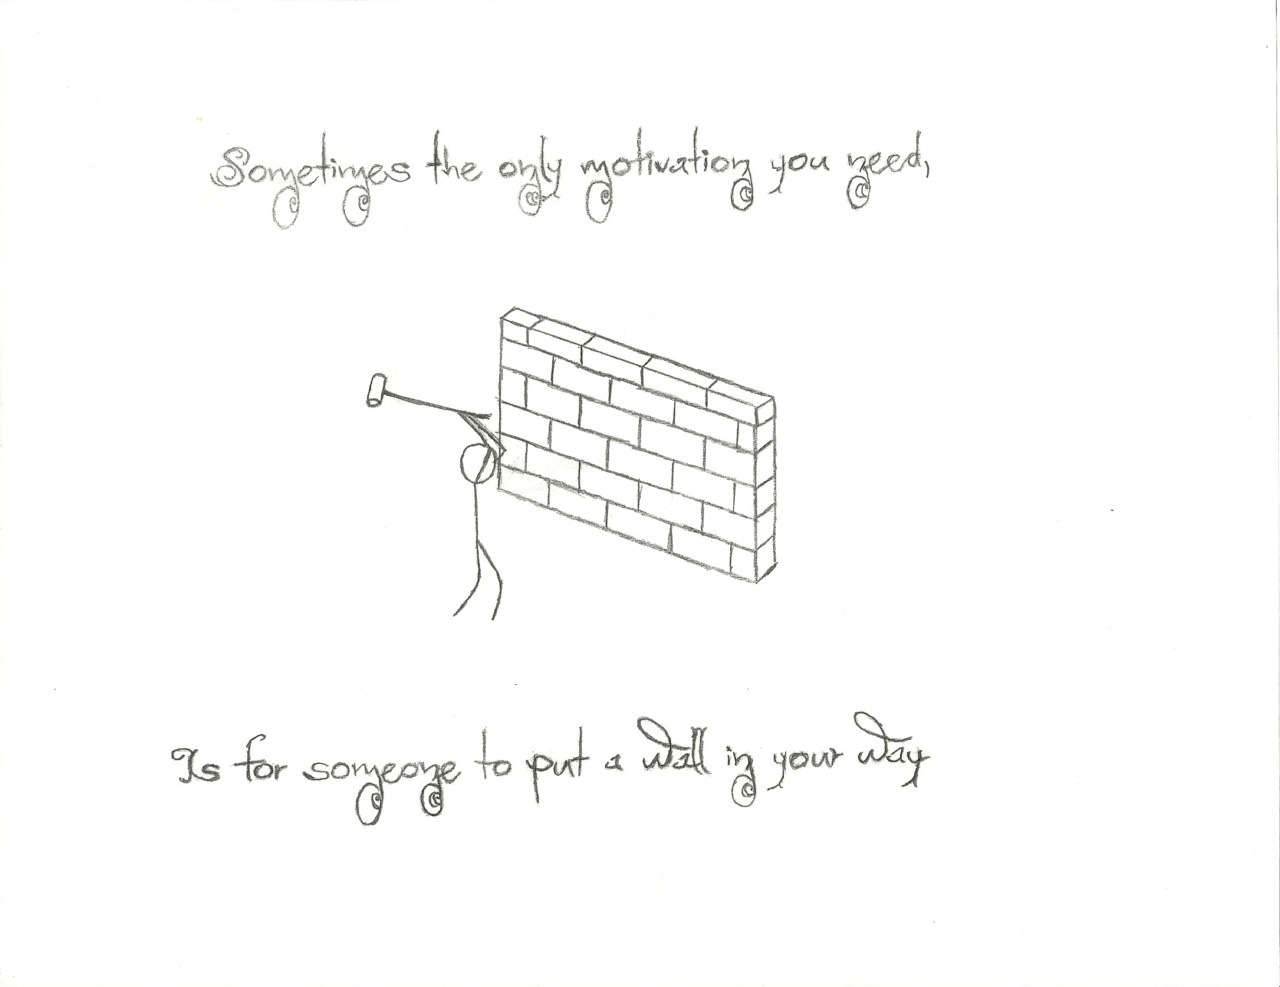 Runner Things #2813: Sometimes the only motivation you need is for someone to put a wall in your way.